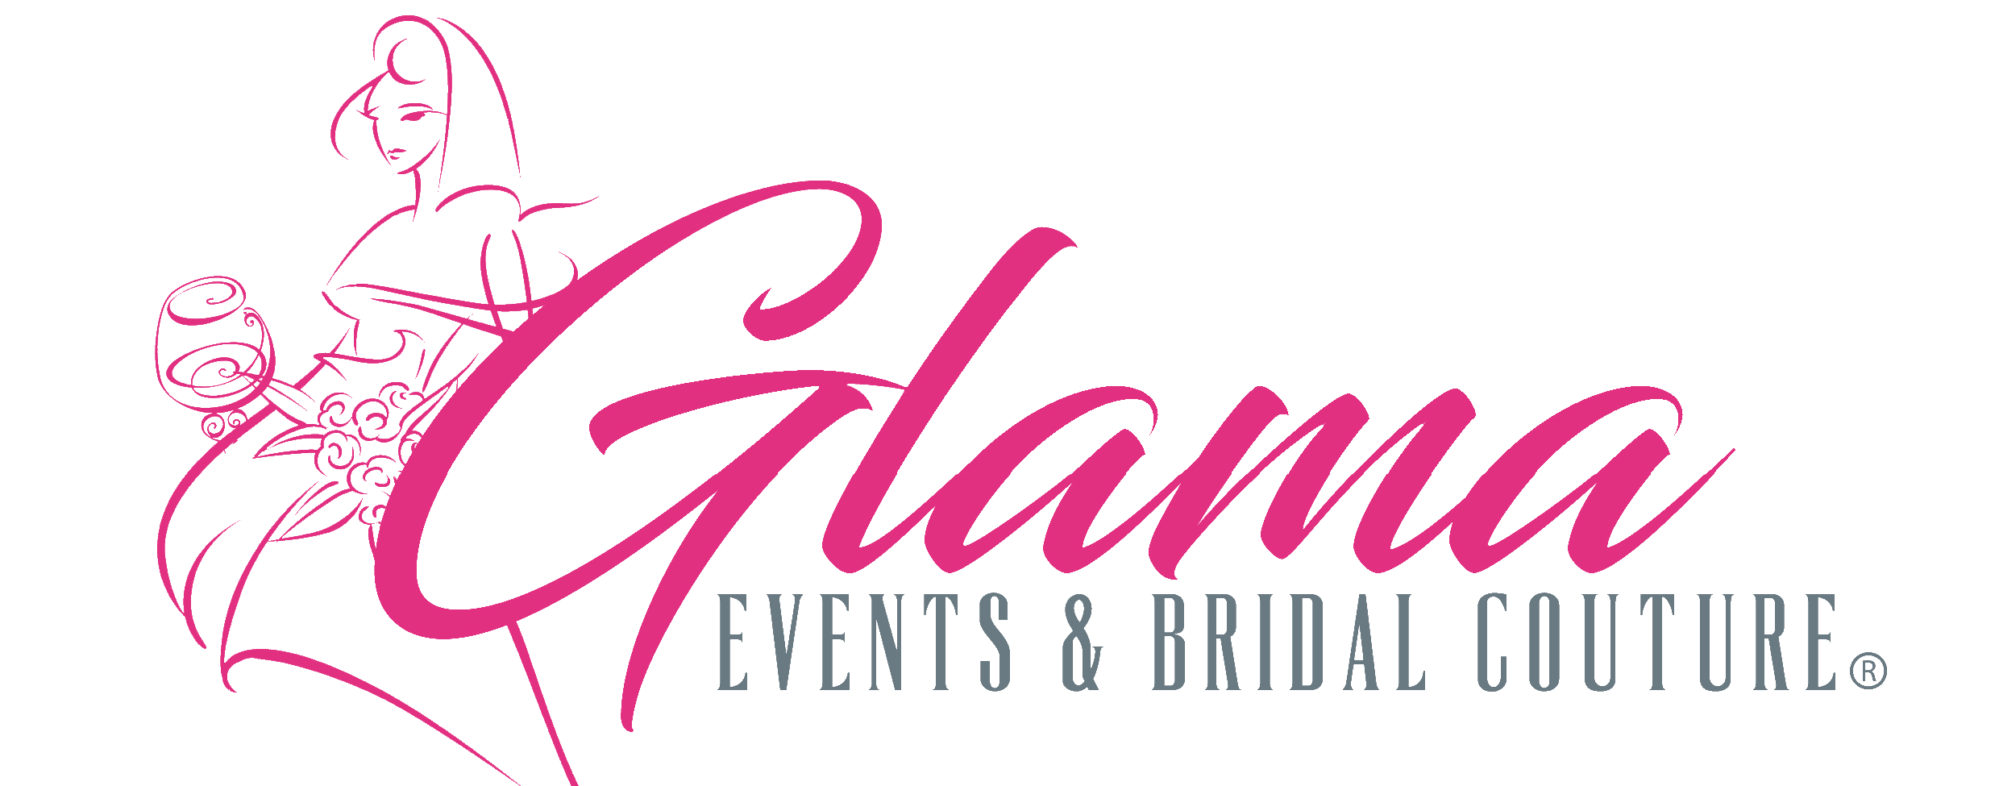 Bridal Couture Logo - Glama Events & Bridal Couture